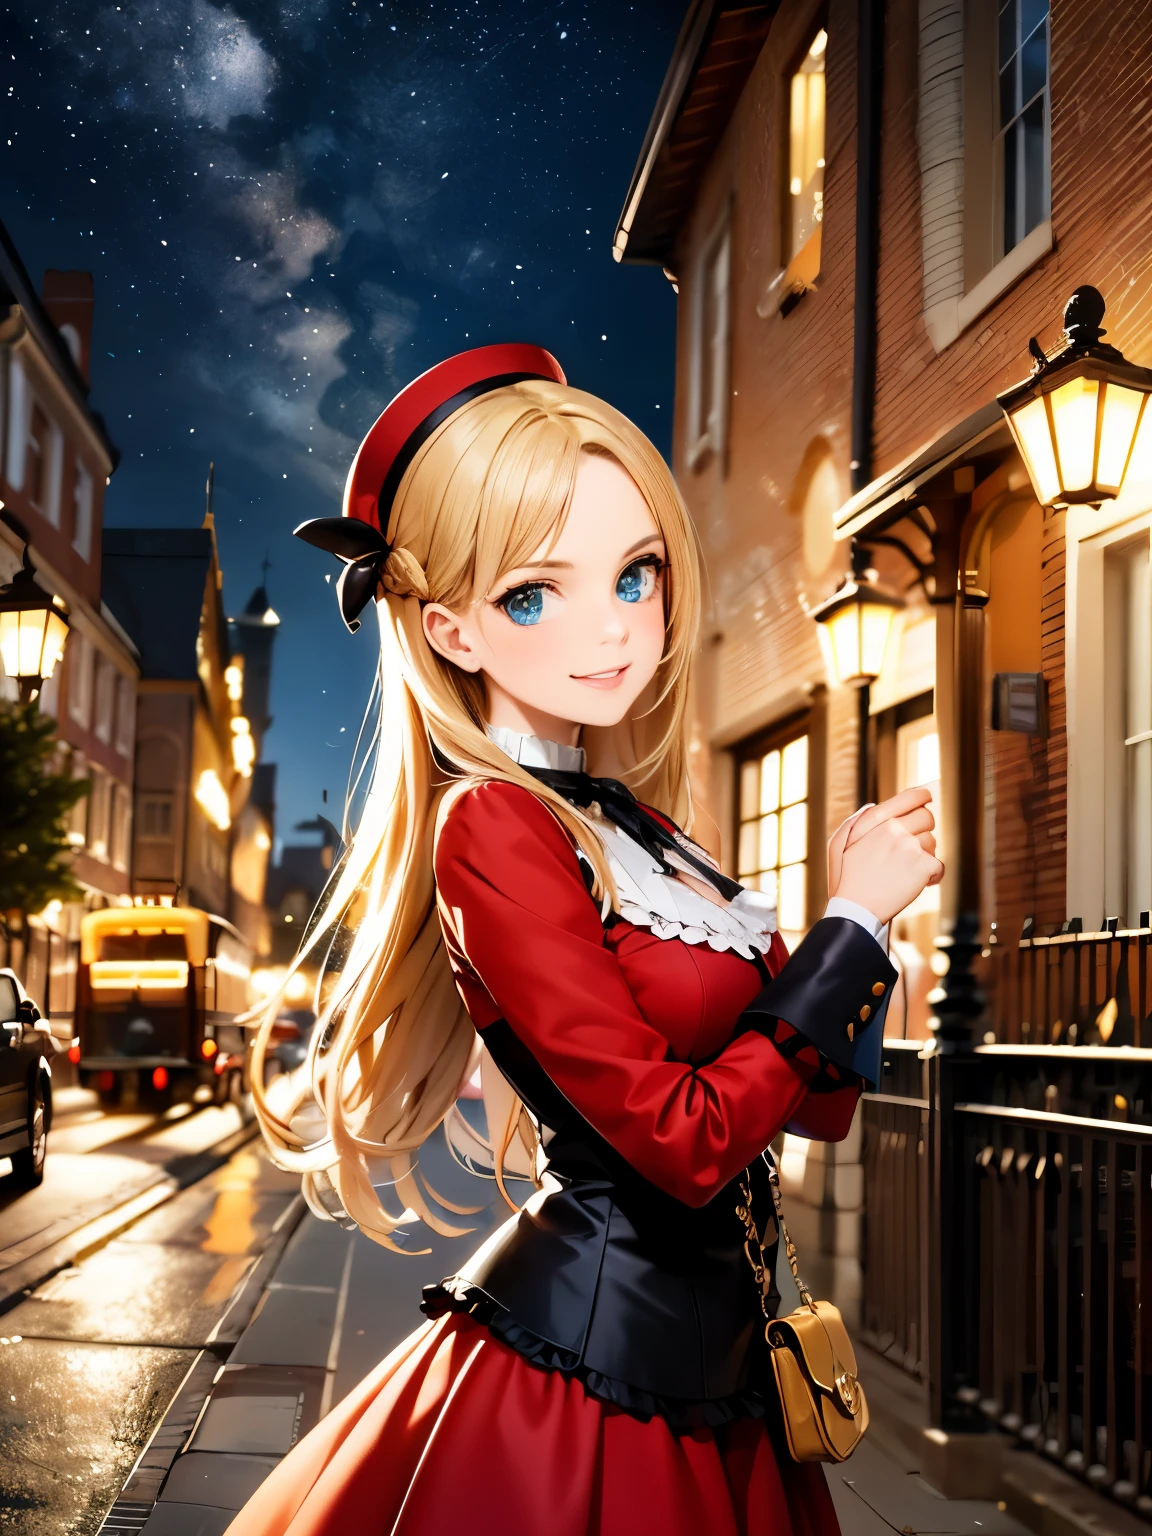 masterpiece), best quality, expressive eyes, perfect face,a girl smiles towards the camera in a wonderful sunny day. her smile is cheerful but contained and reserved, Victorian era posing in front of a period building, night, street lights, people along the road, horse-drawn carriages, romantic atmosphere, sky with various nocturnal colors and stars.​